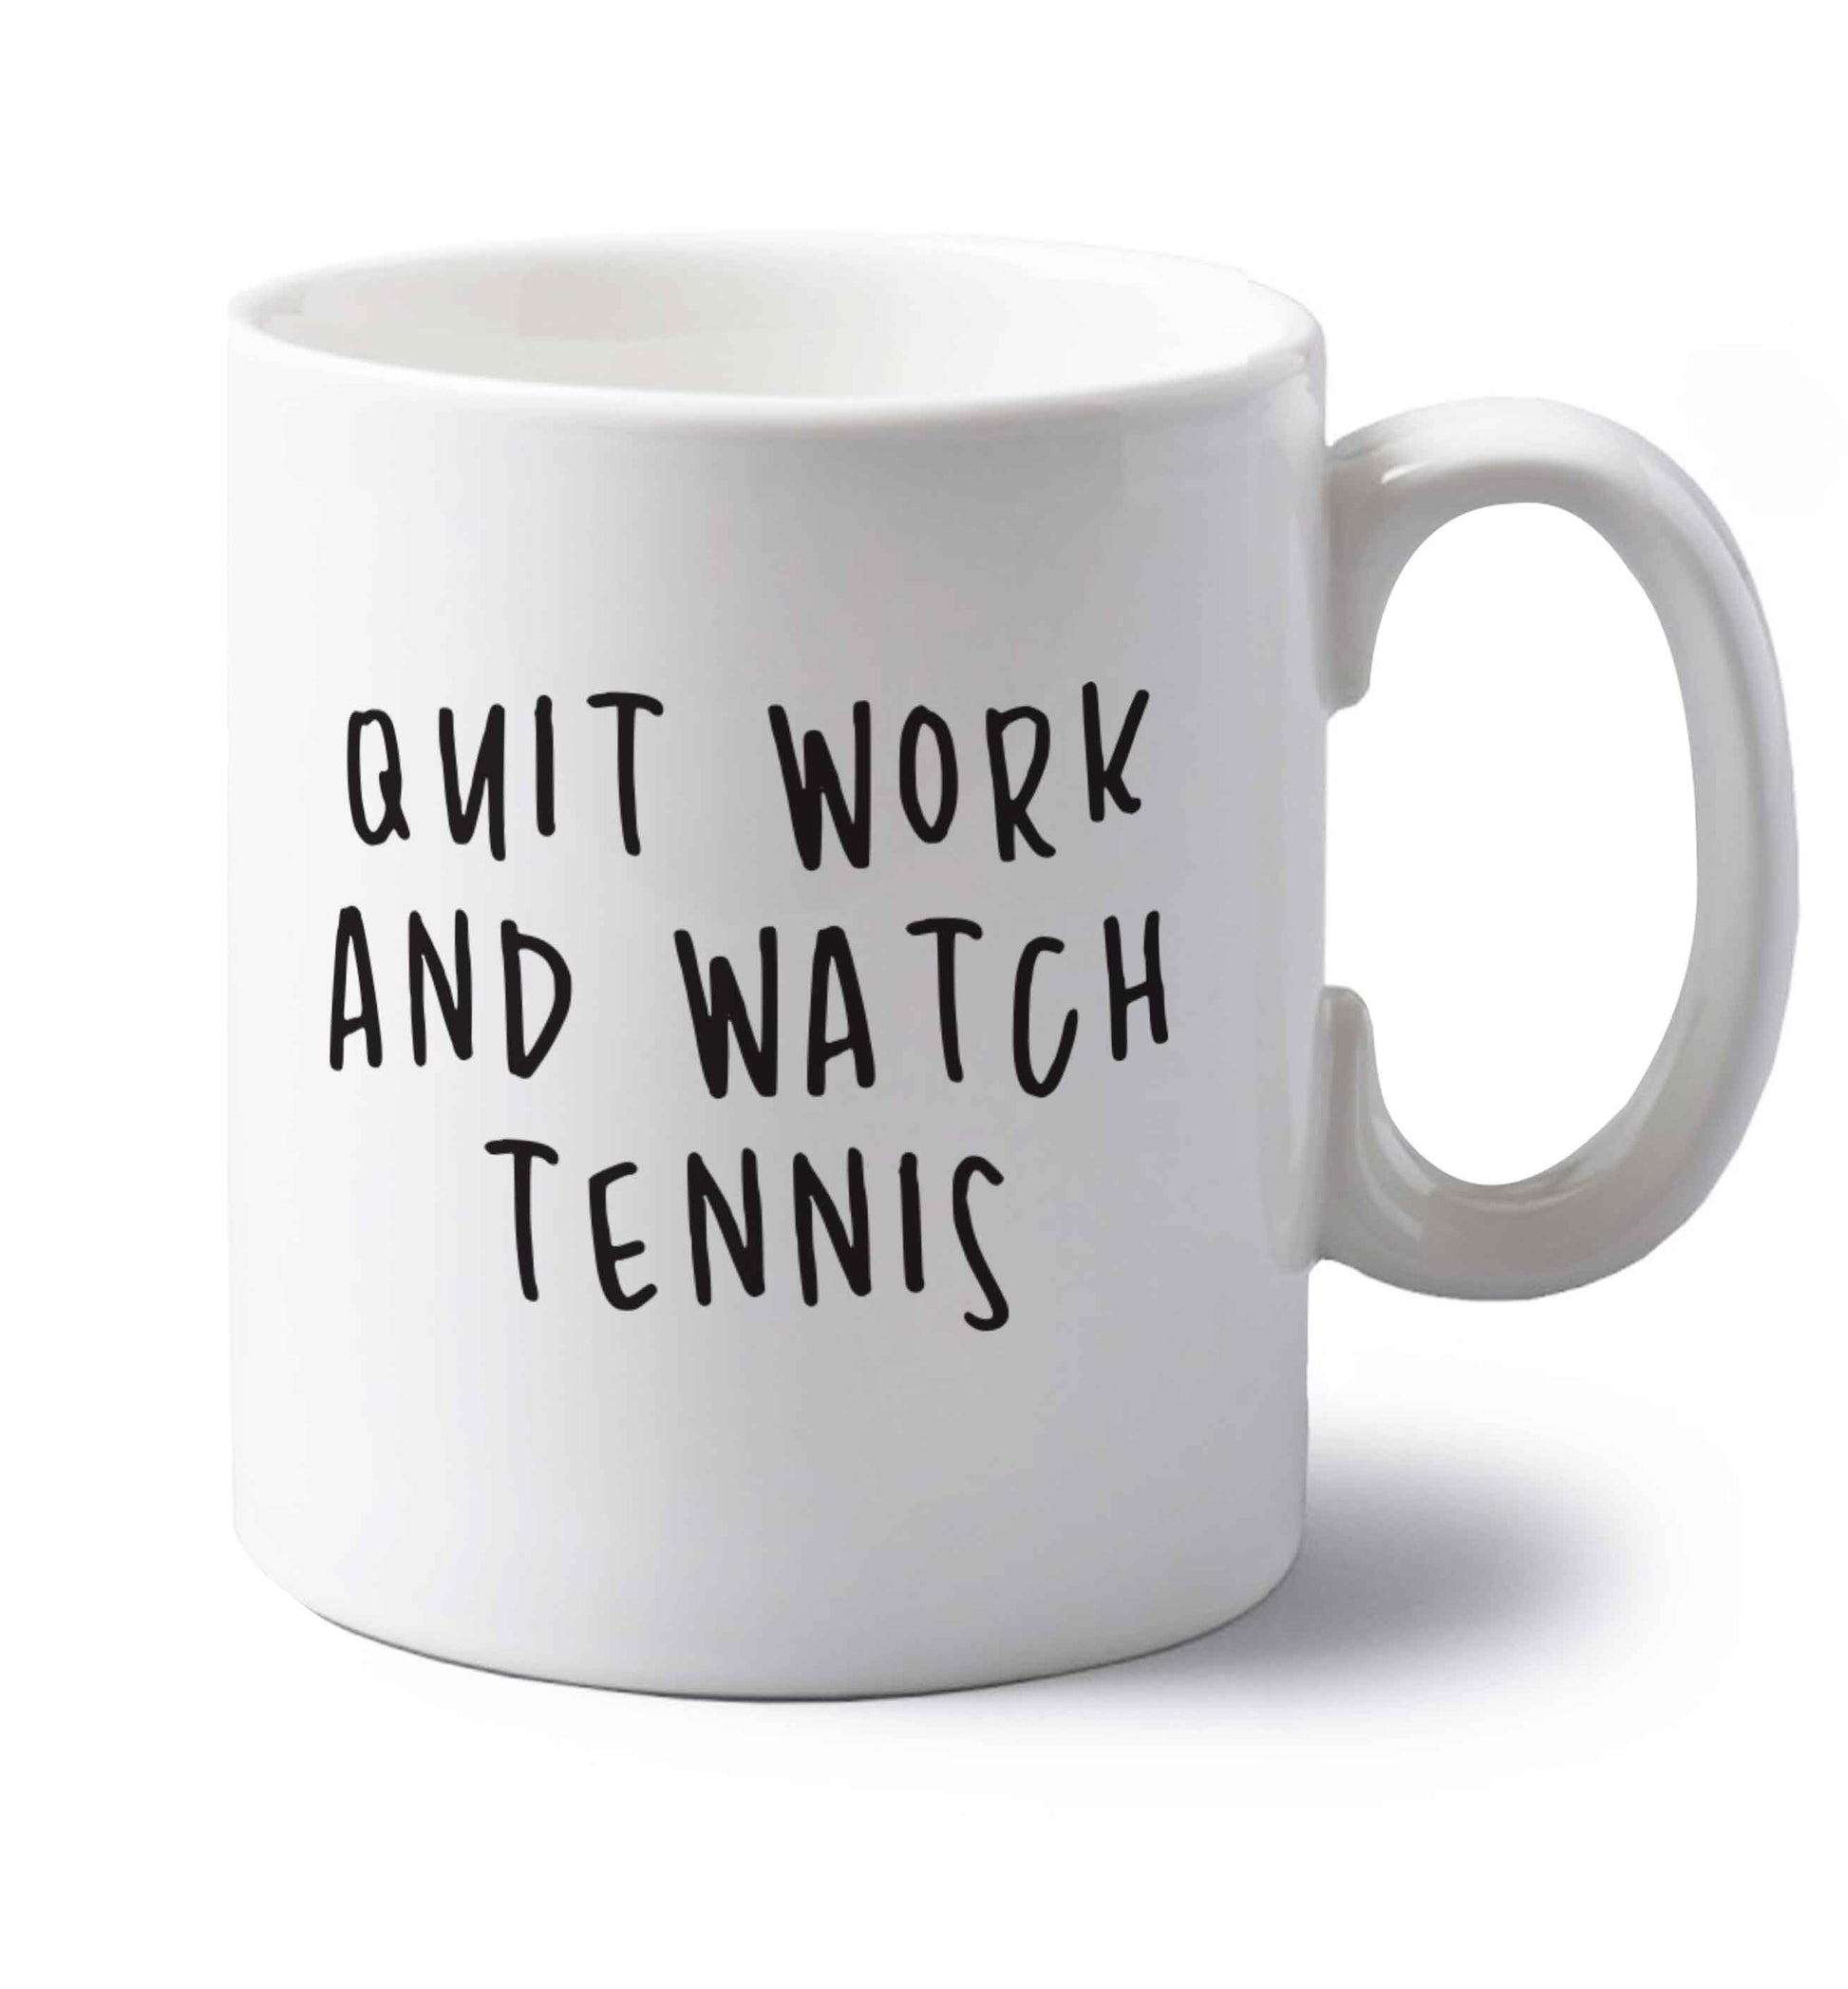 Quit work and watch tennis left handed white ceramic mug 